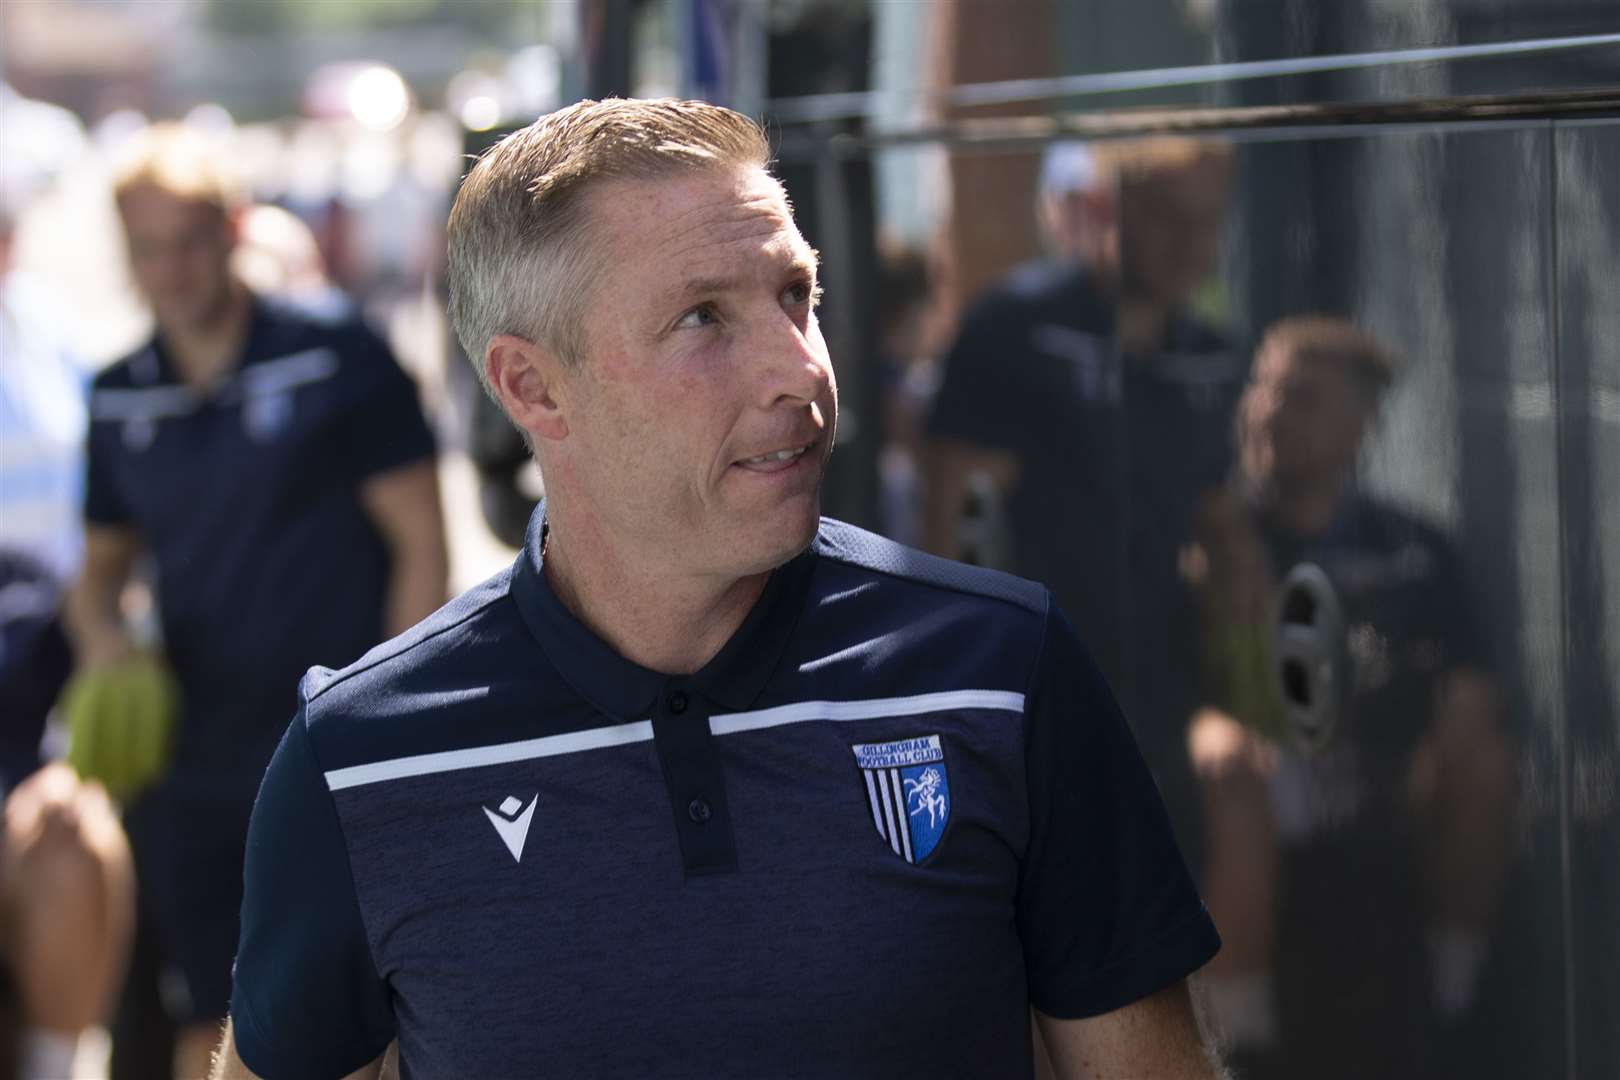 Gillingham manager Neil Harris is not prepared to accept personal abuse